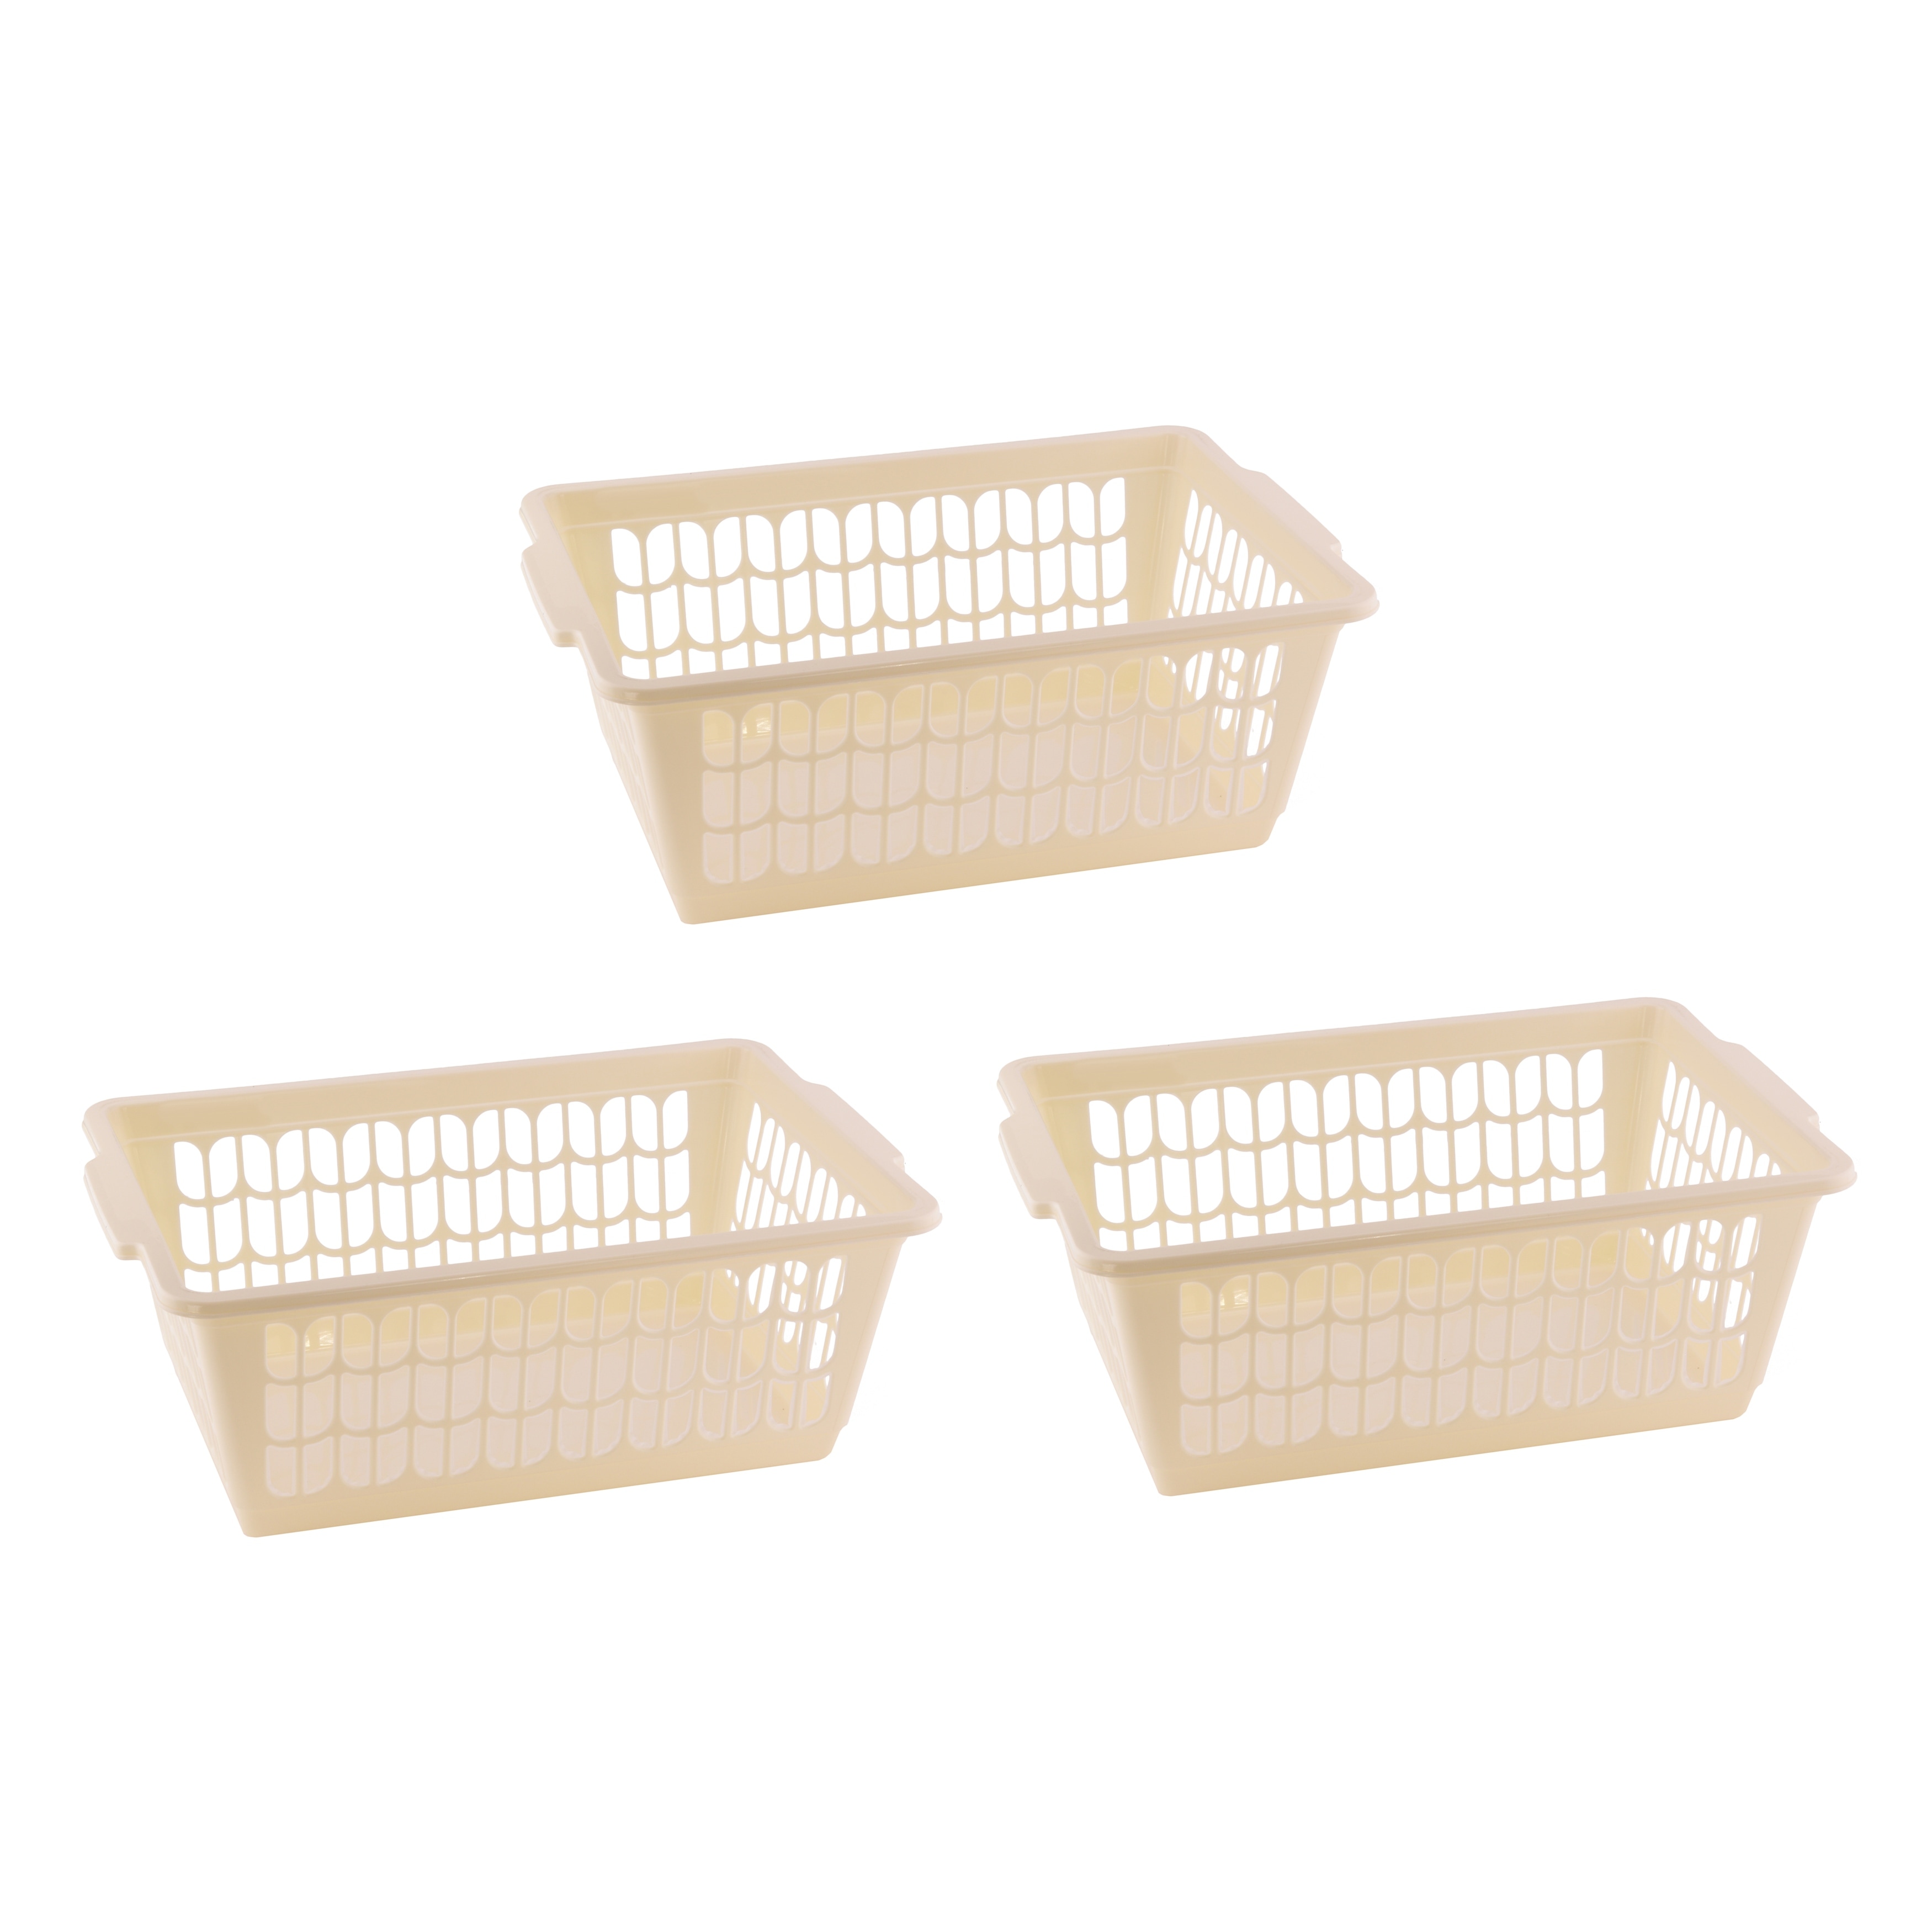 https://ak1.ostkcdn.com/images/products/is/images/direct/7fef92ccd0fd7800694c7cc0e09d93e0583e5c84/Small-Plastic-Storage-Basket-for-Organizing-Kitchen-Pantry%2C-Countertop%2C-Shelves.jpg